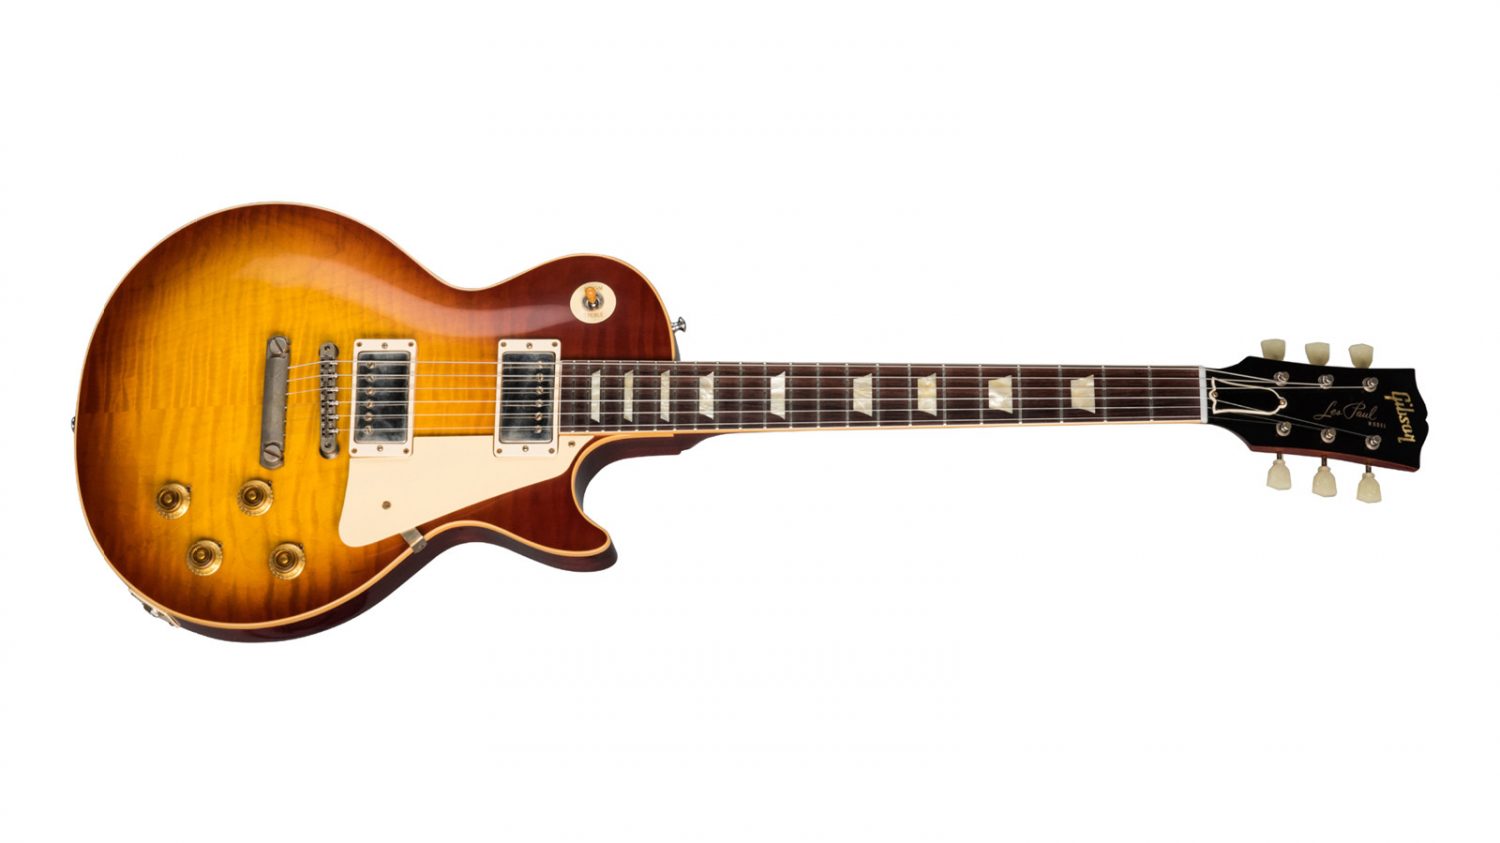 Finally! The classic Gibson lineup we’ve been waiting for is here